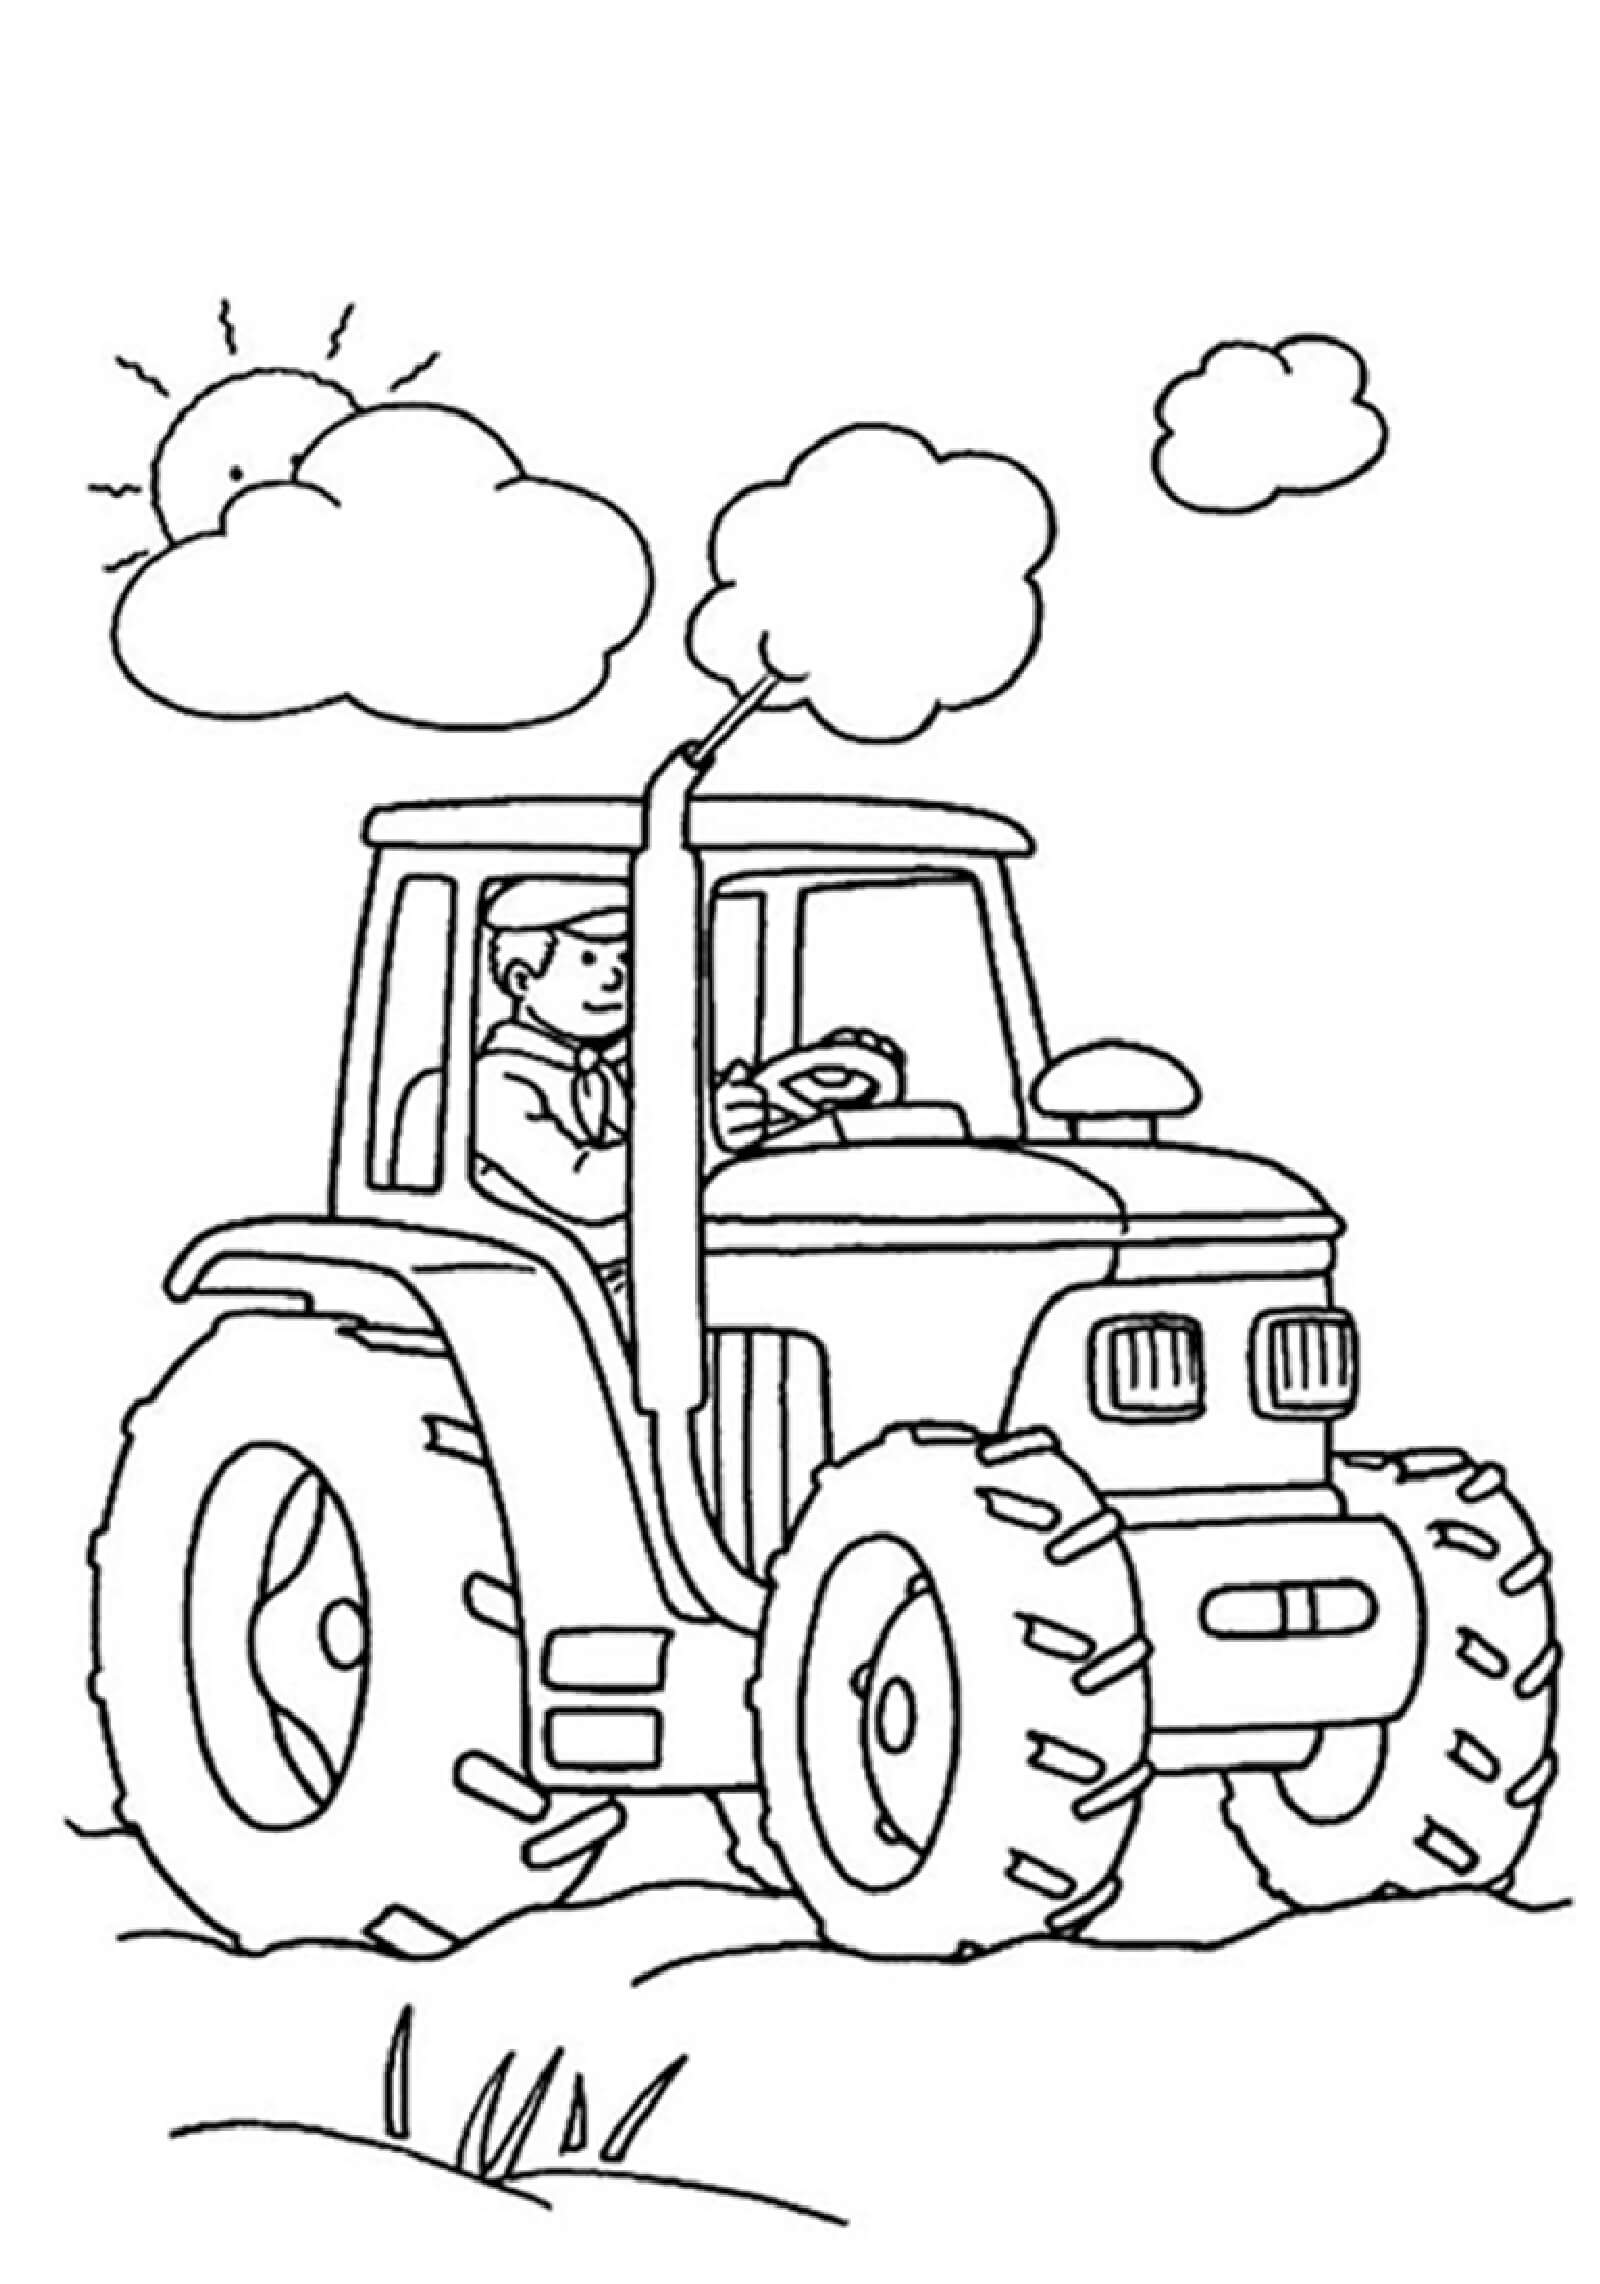 Man Driving Tractor with Clouds